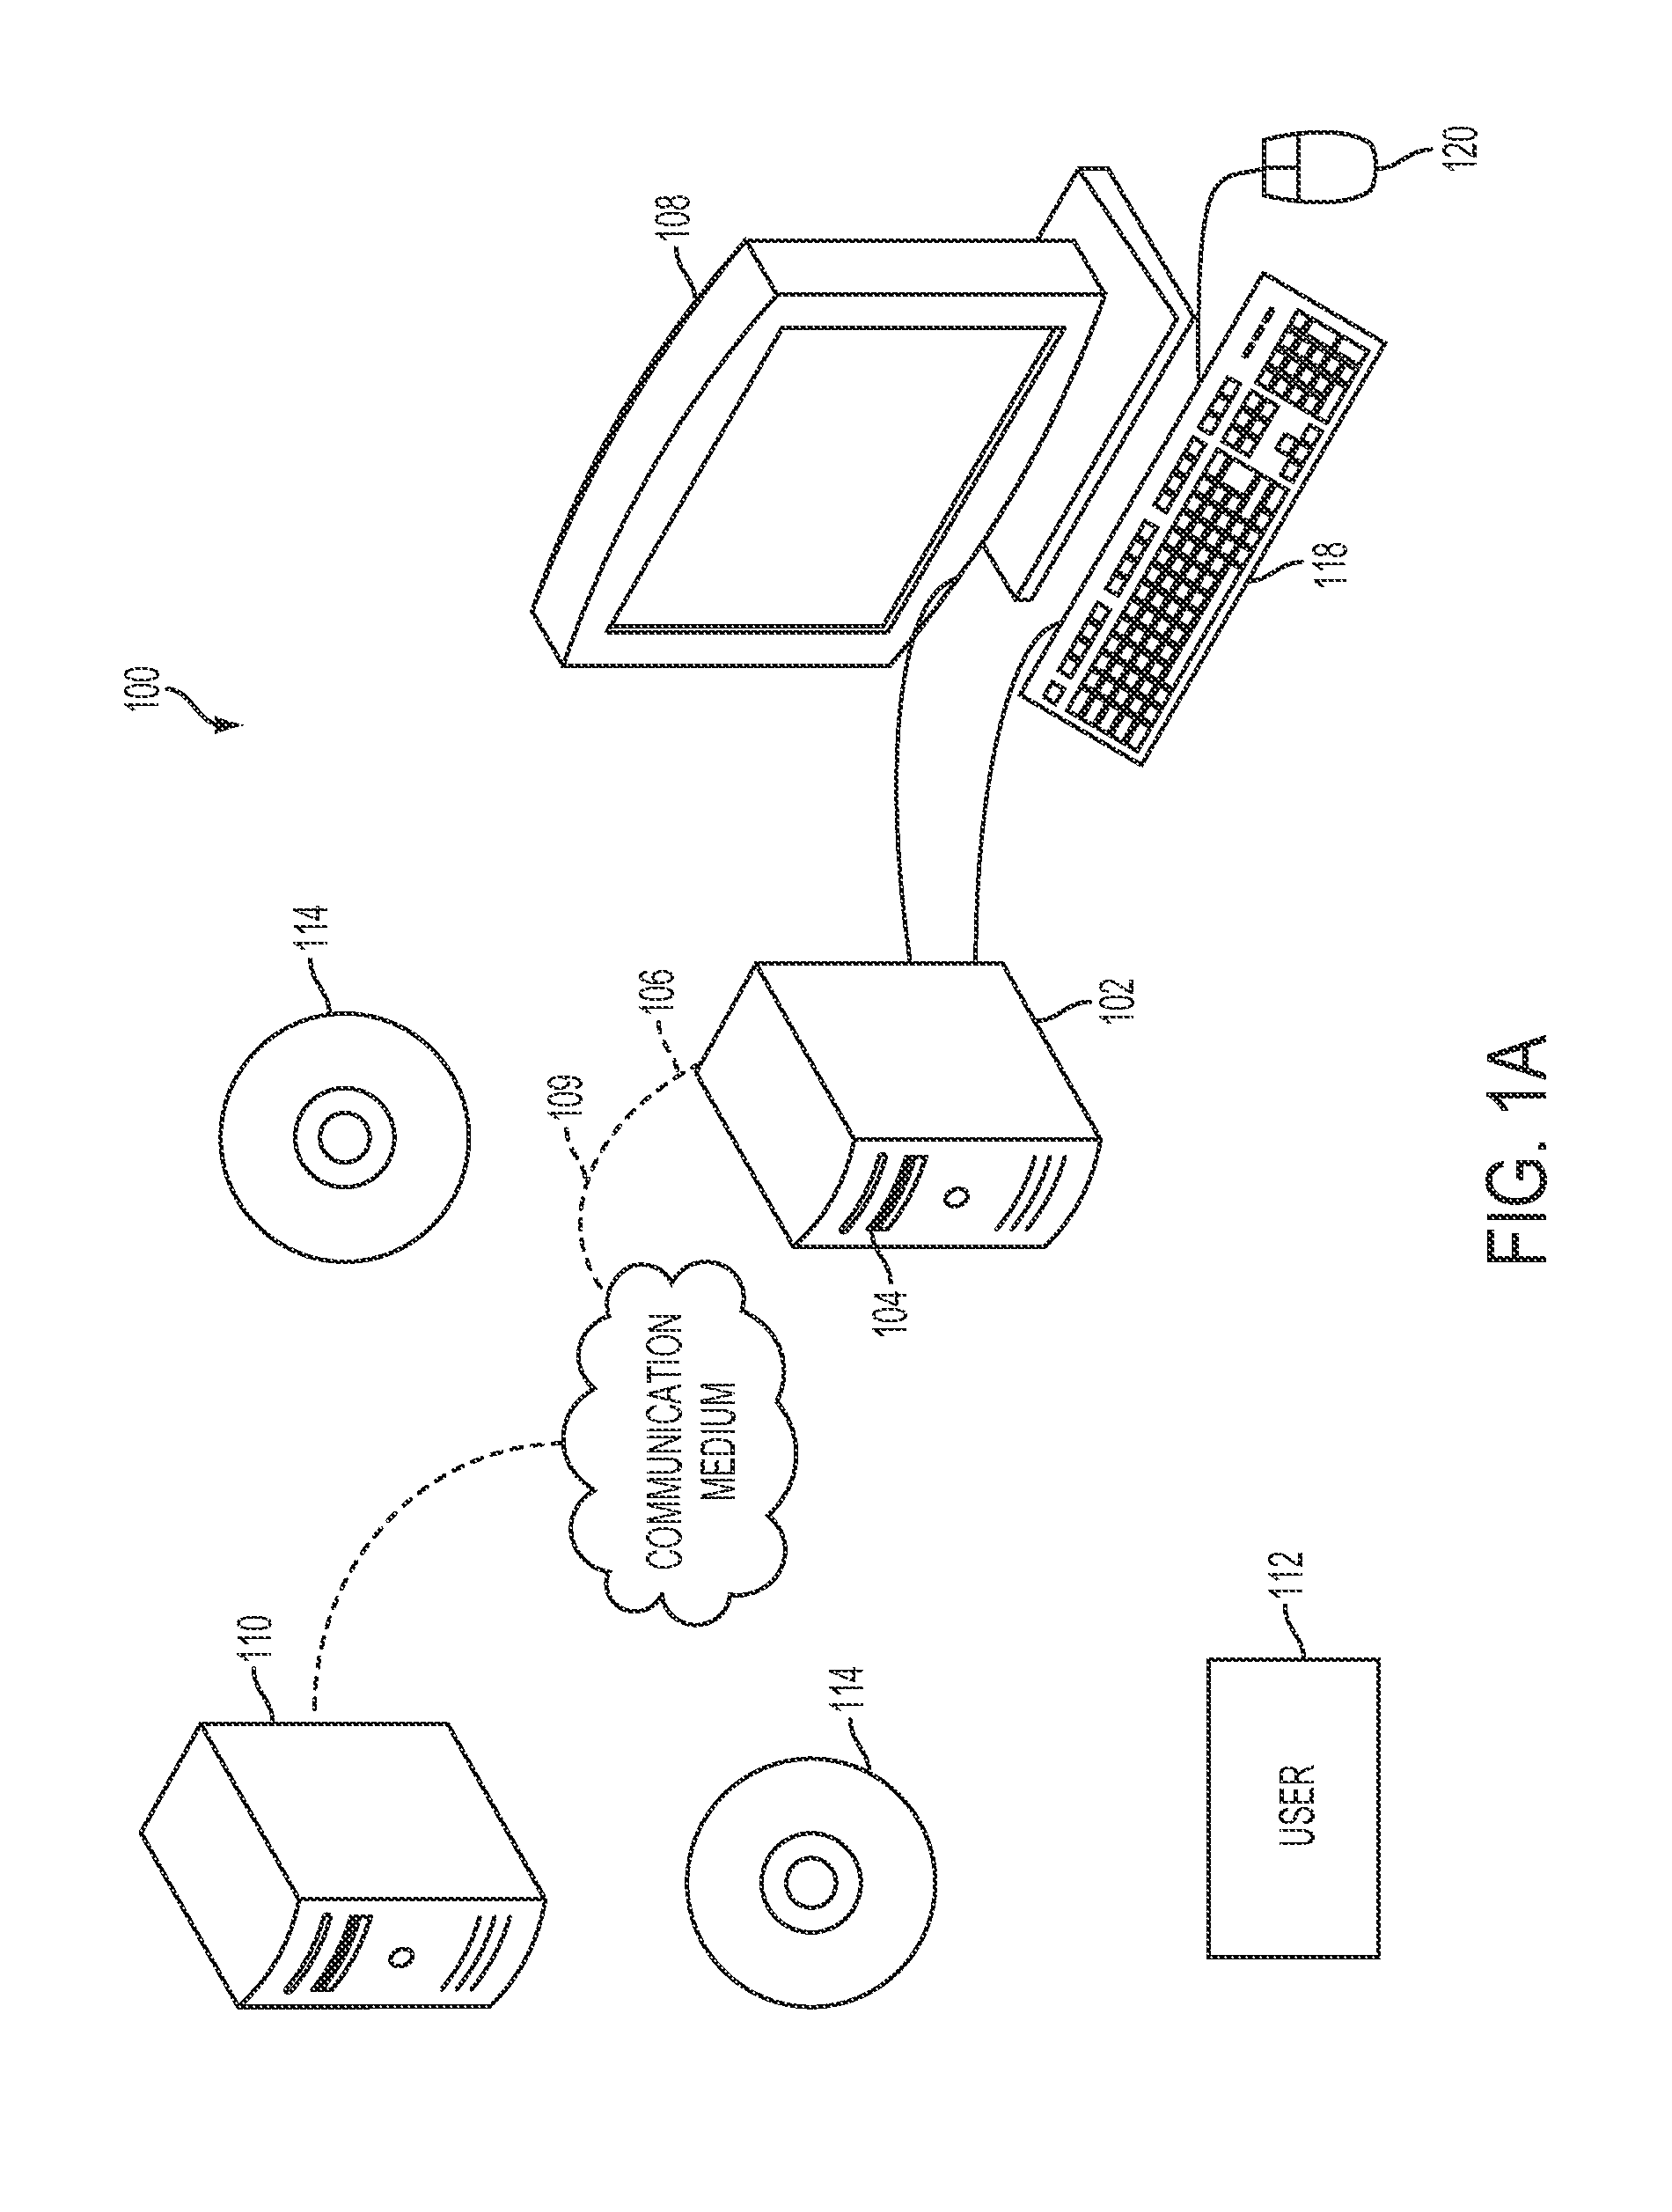 Systems and methods for enhancing cognition